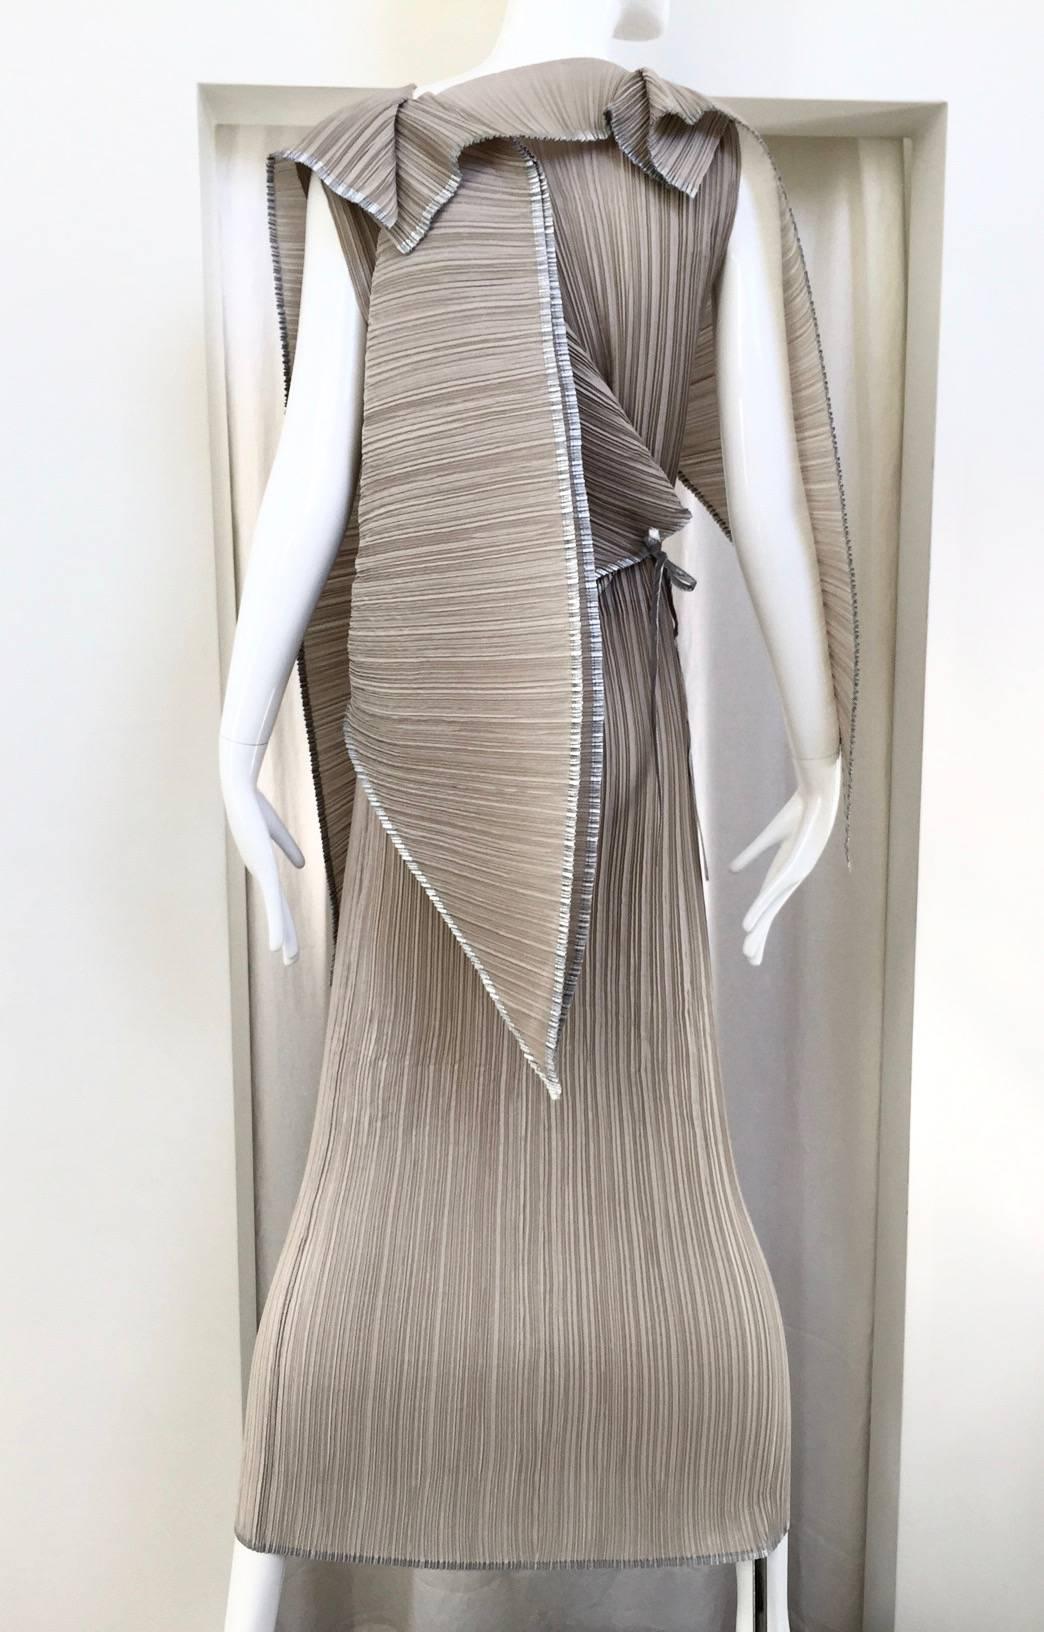 90s Issey miyake light mocha and silver pleat dress
Dress can be styled in multitude of ways.
Fit size 2/4/6/8
